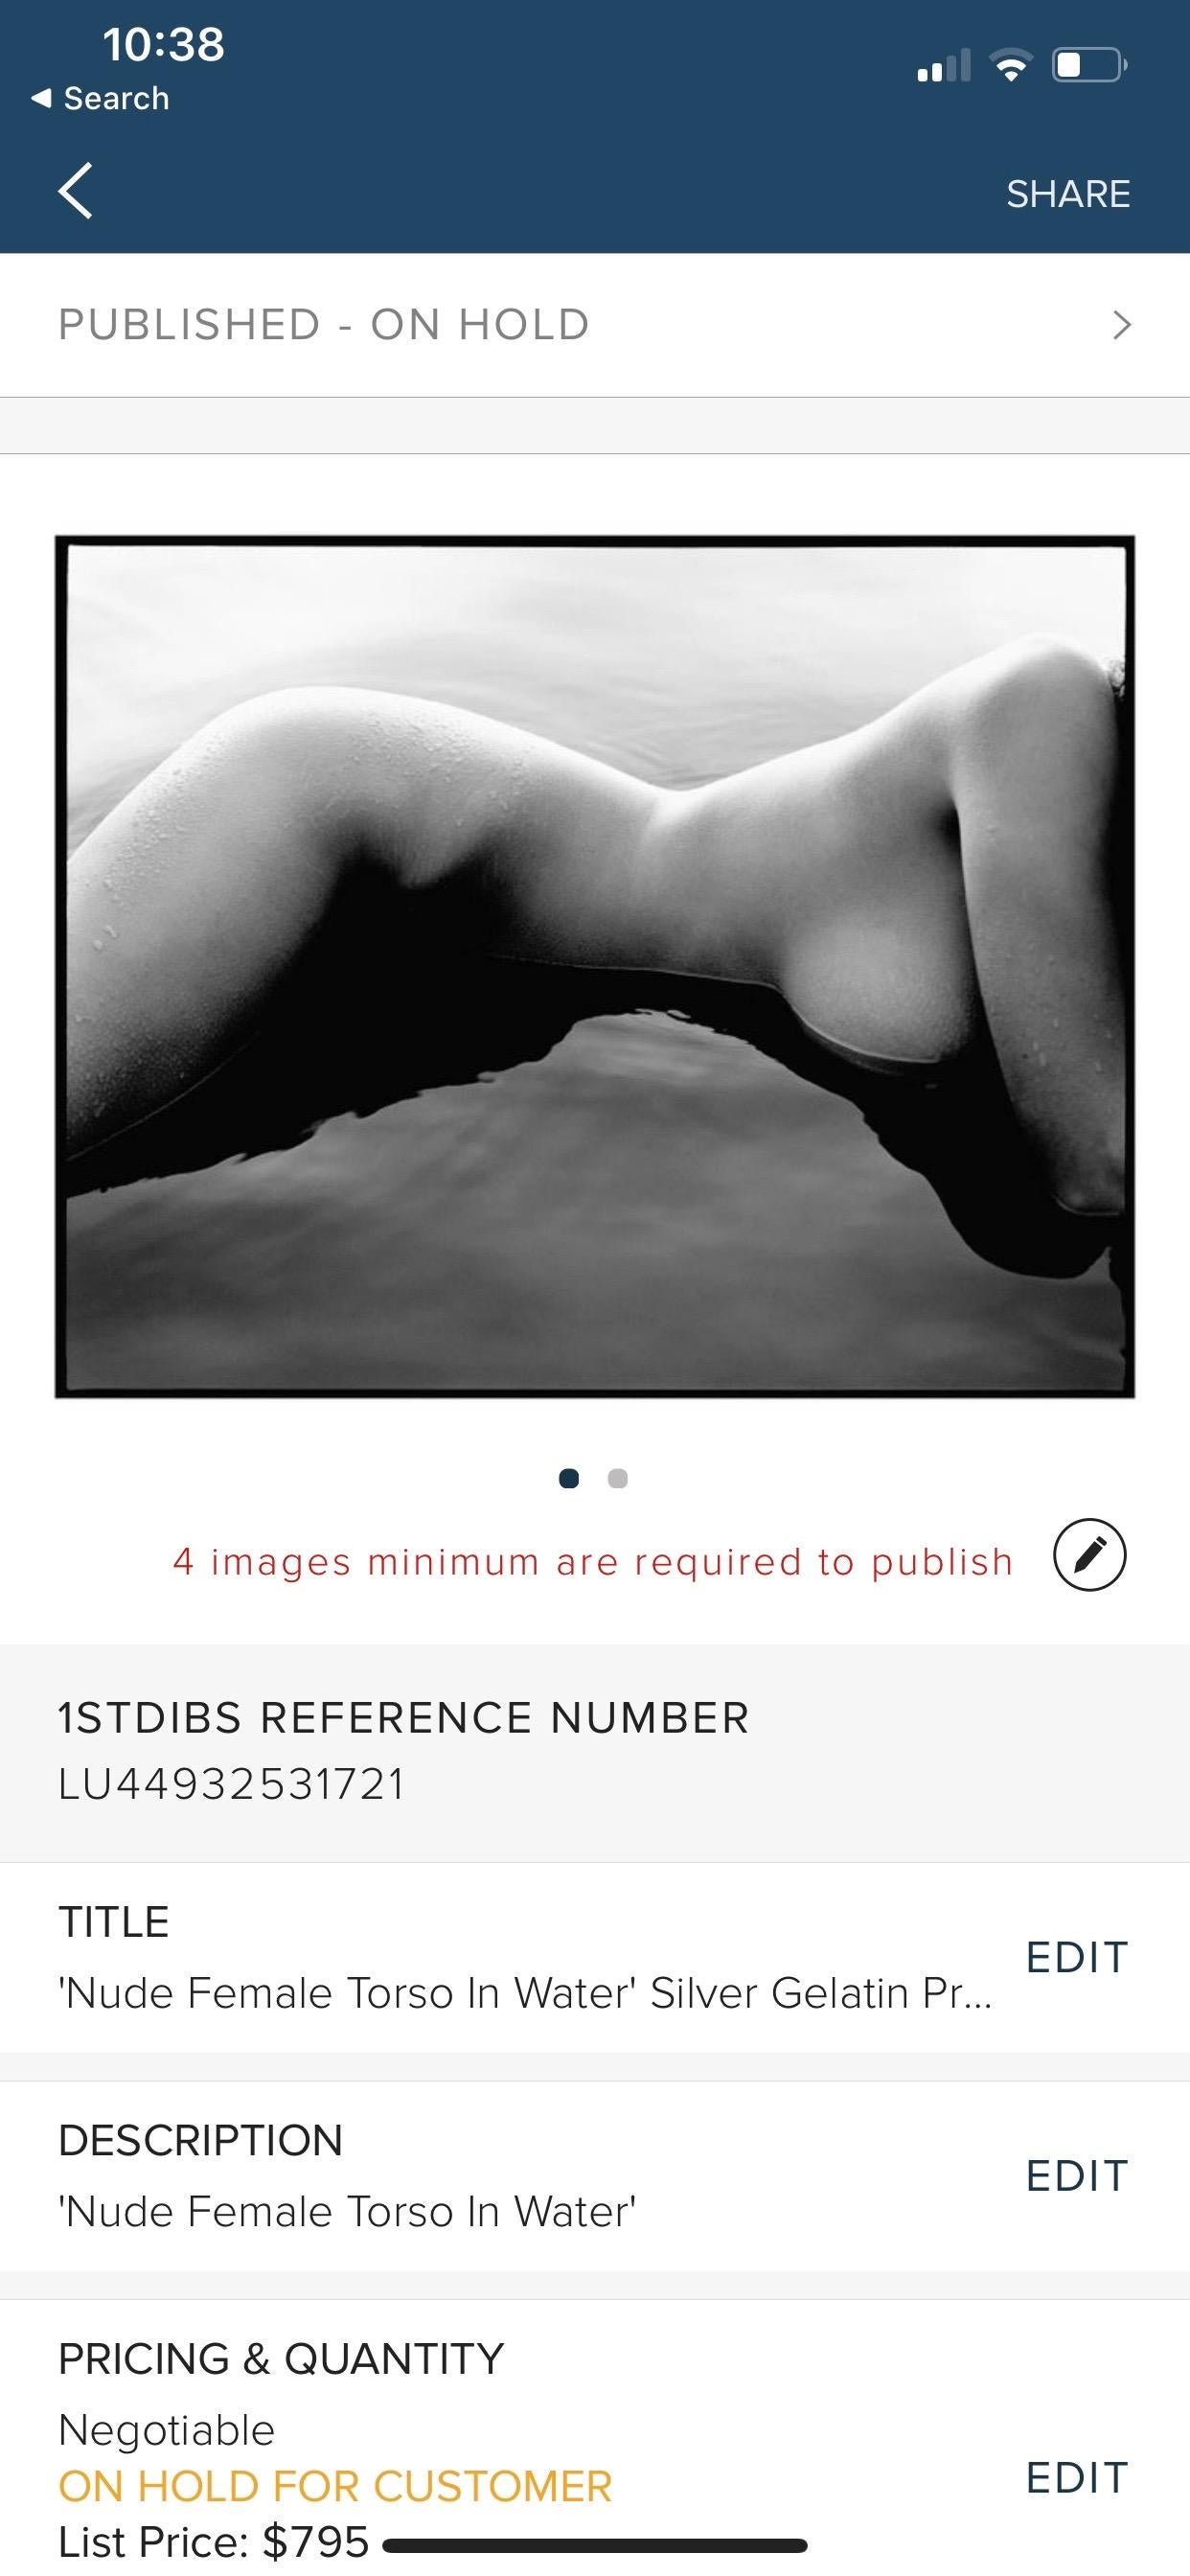 'Nude Female Torso In Water' 
by Kennet Havgaard

Exquisite, very large 40x30" inches / 101 x 76 cm Silver Gelatin resin Print.

Certificate of authenticity provided.
Stamped.

Free shipping.

(This image by Kennet Havgaard / Getty Images)
